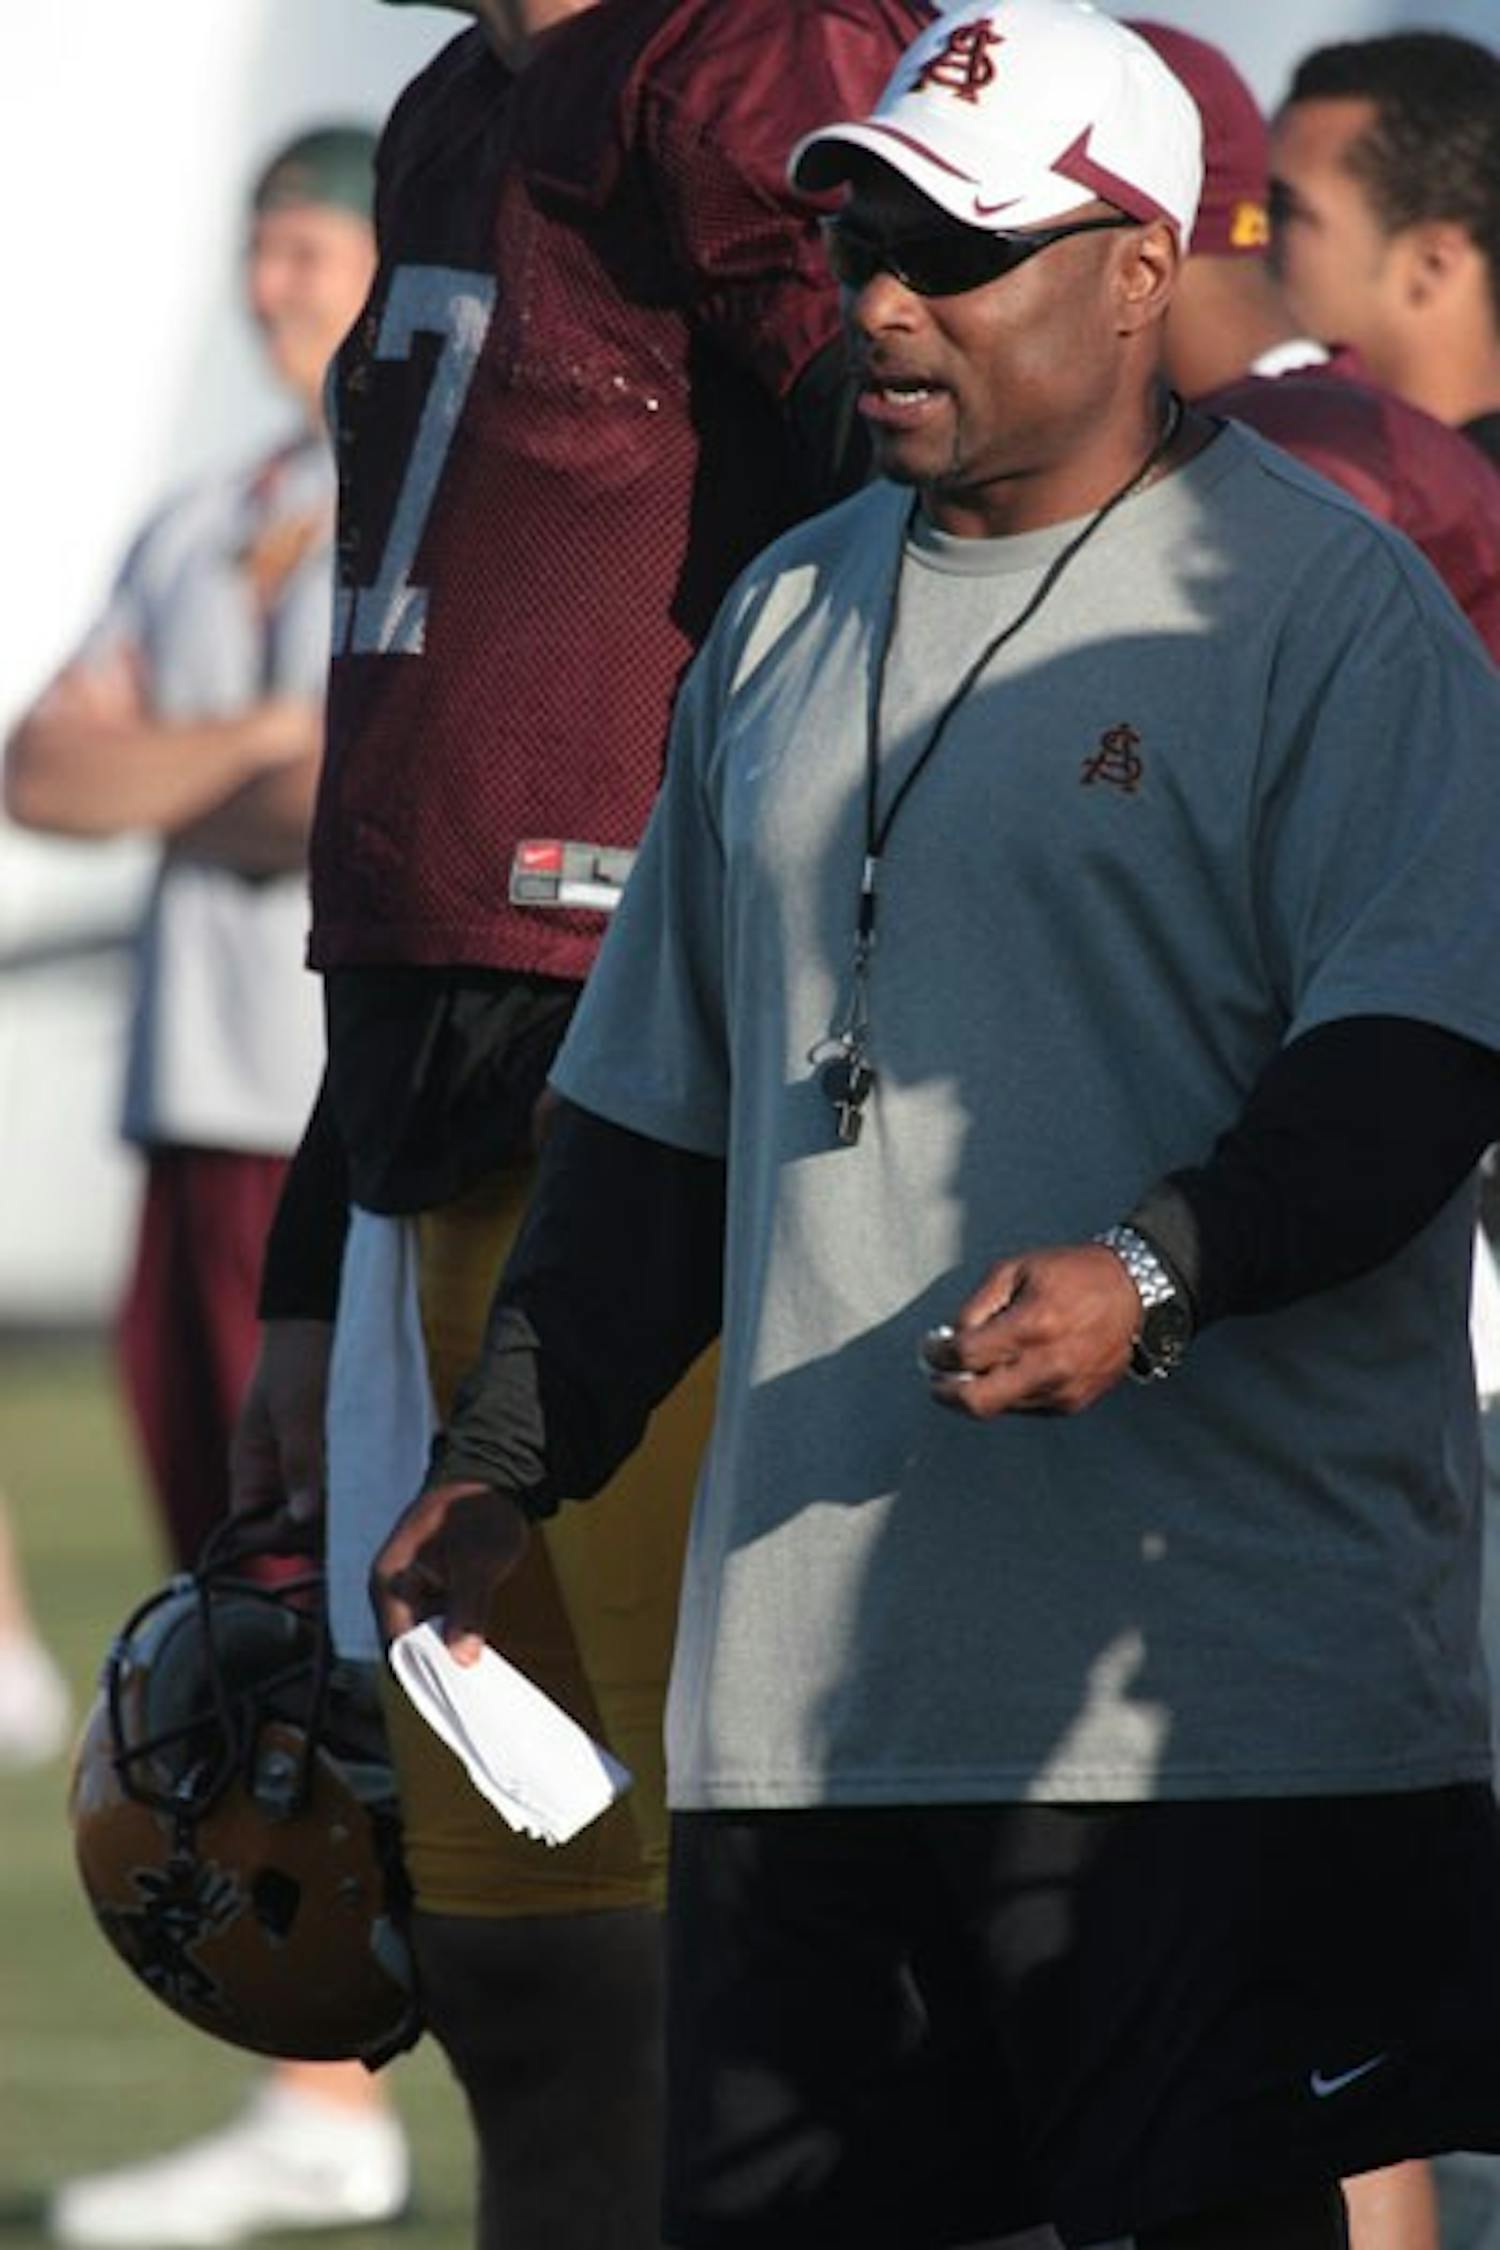 FIRM, FAIR, FLEXIBLE: ASU wide receivers coach Steve Broussard offers instructions during a spring practice earlier this month at Bill Kajikawa practice field. (Photo by Nick Kosmider)